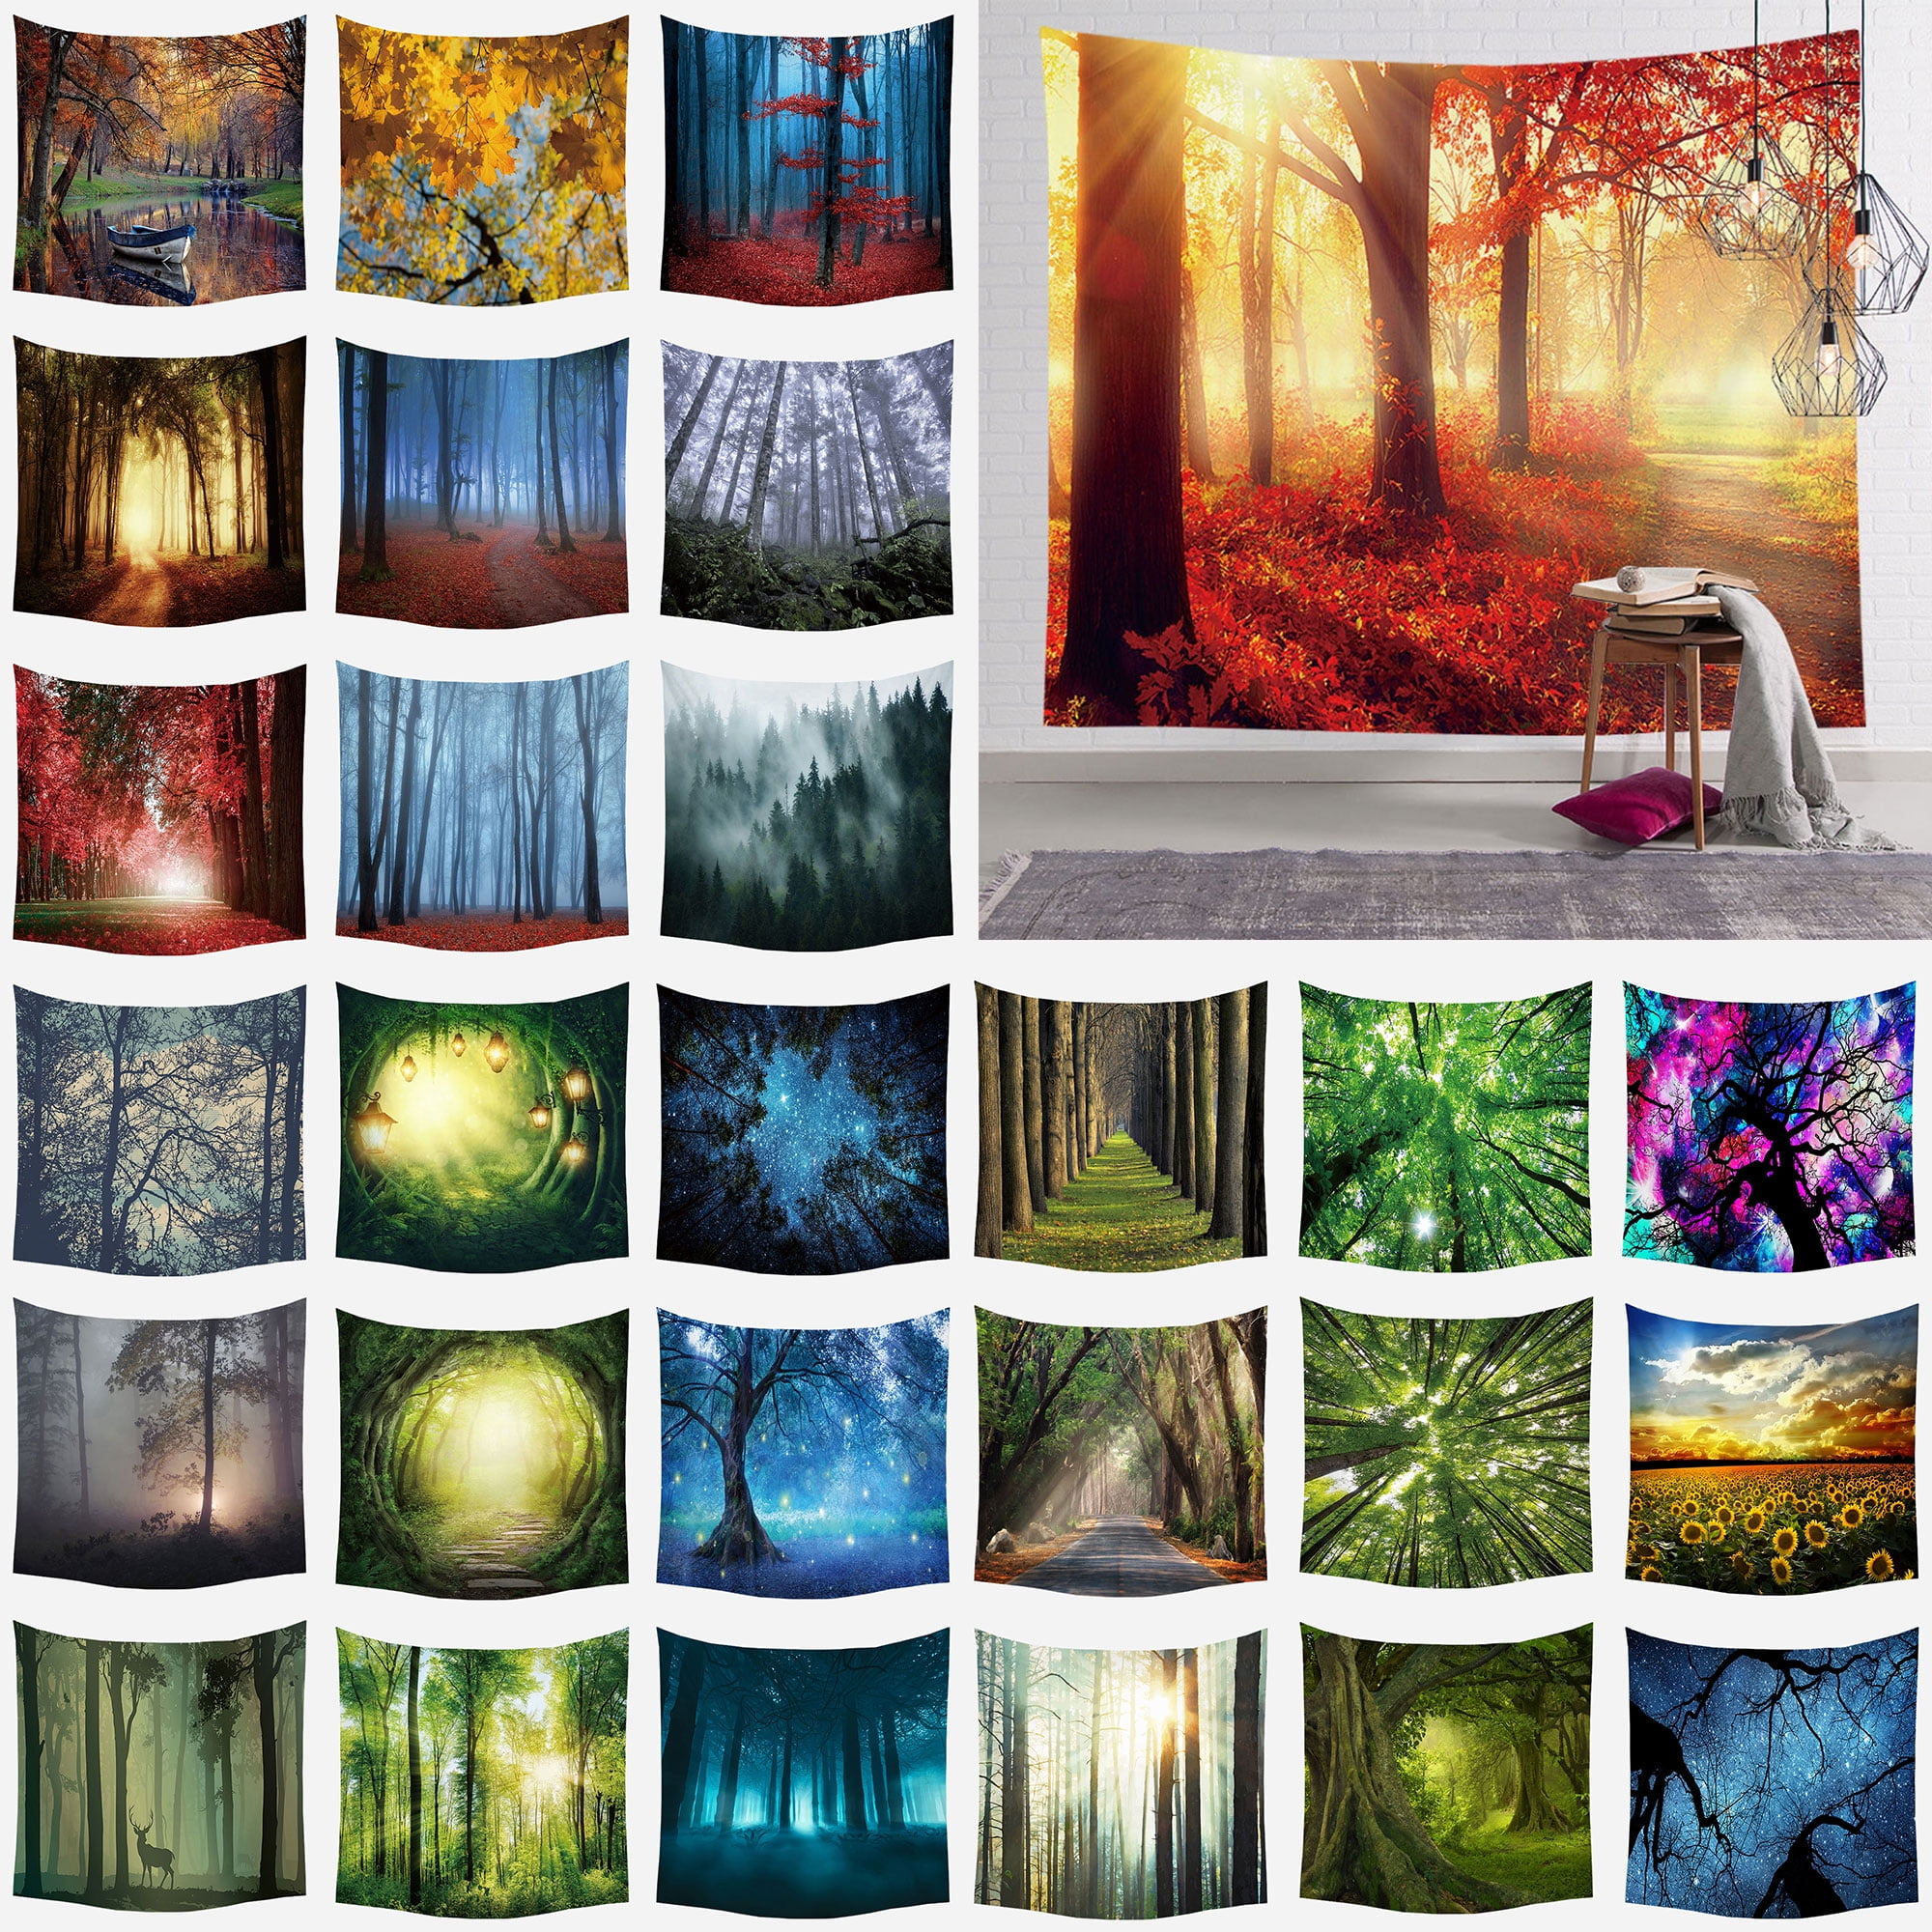 Woodland Wall Art Home Decor, Retro Vintage Style Forest With Sunlight